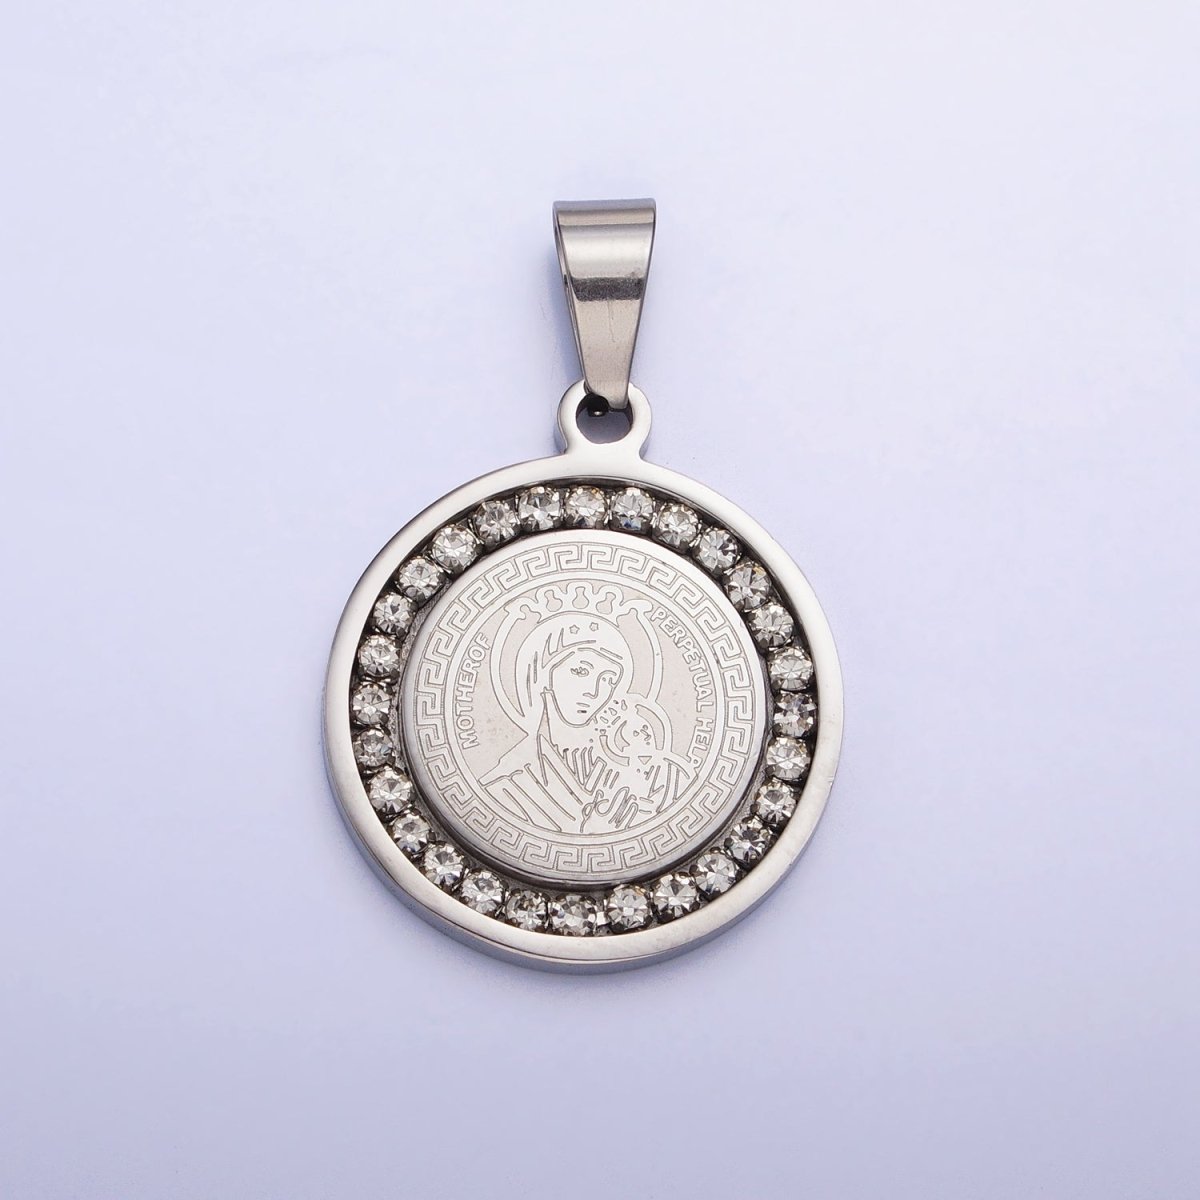 Double Sided Our Lady of Perpetual Help Medallion Virgin Mary Madonna Pendant Catholic Religious Supply in Stainless Steel P-1116 - DLUXCA